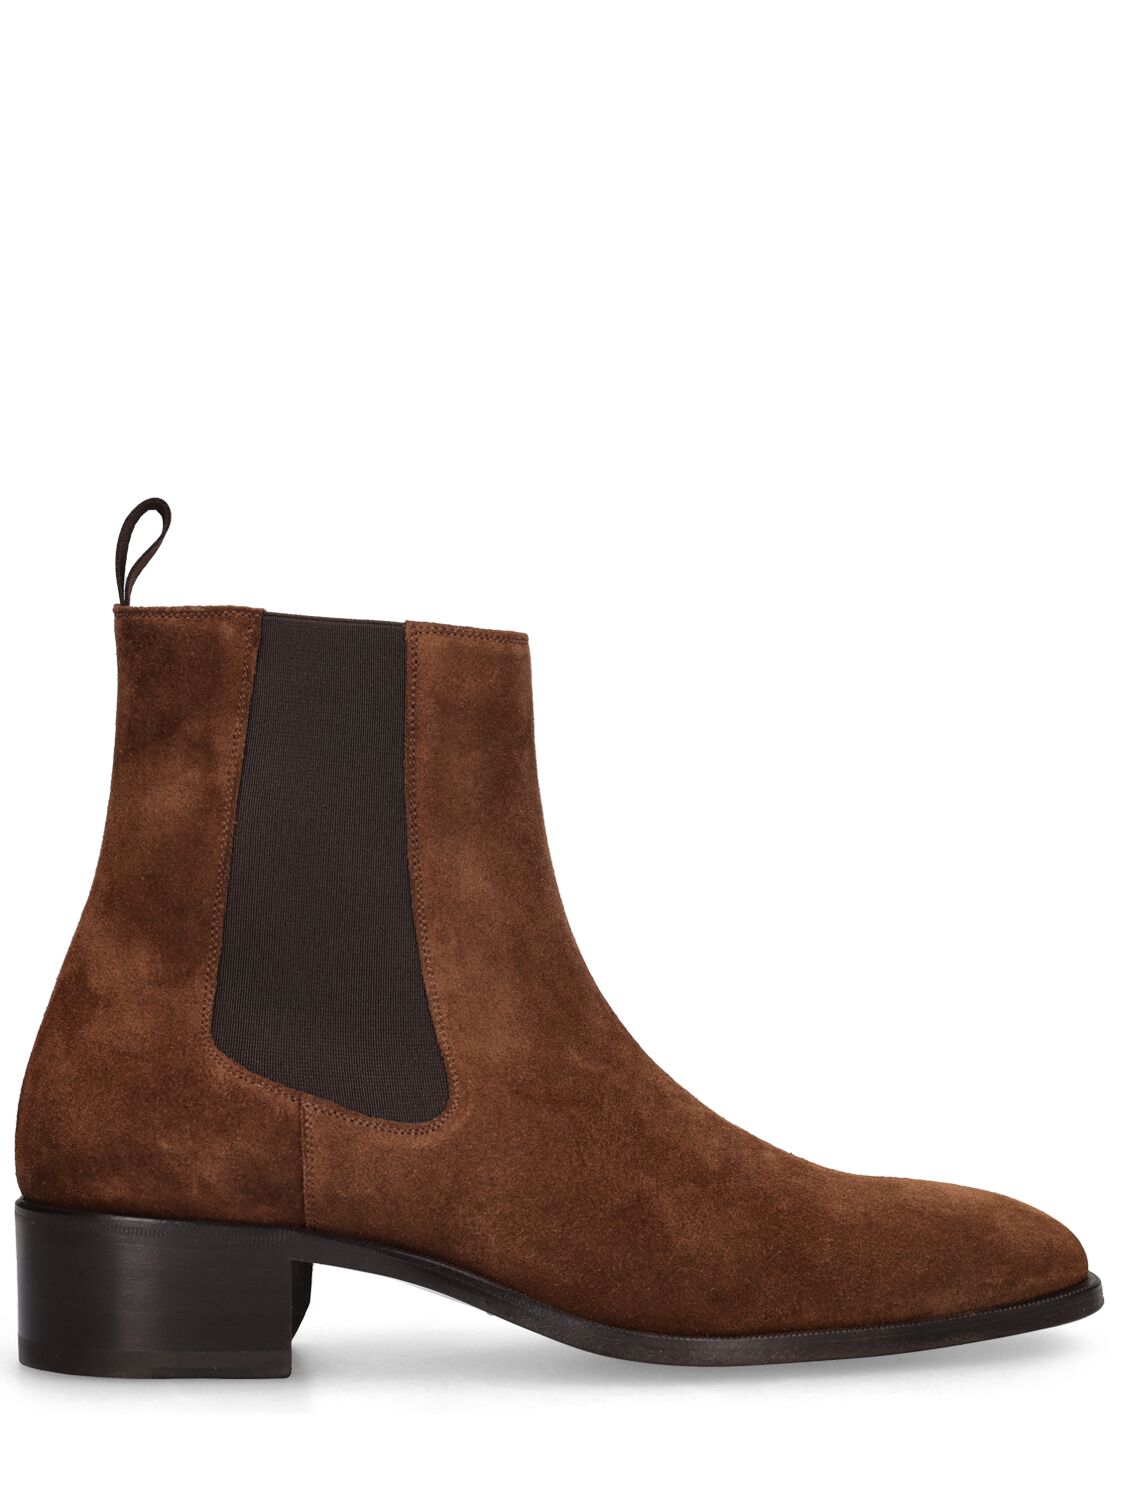 40mm Suede Ankle Boots